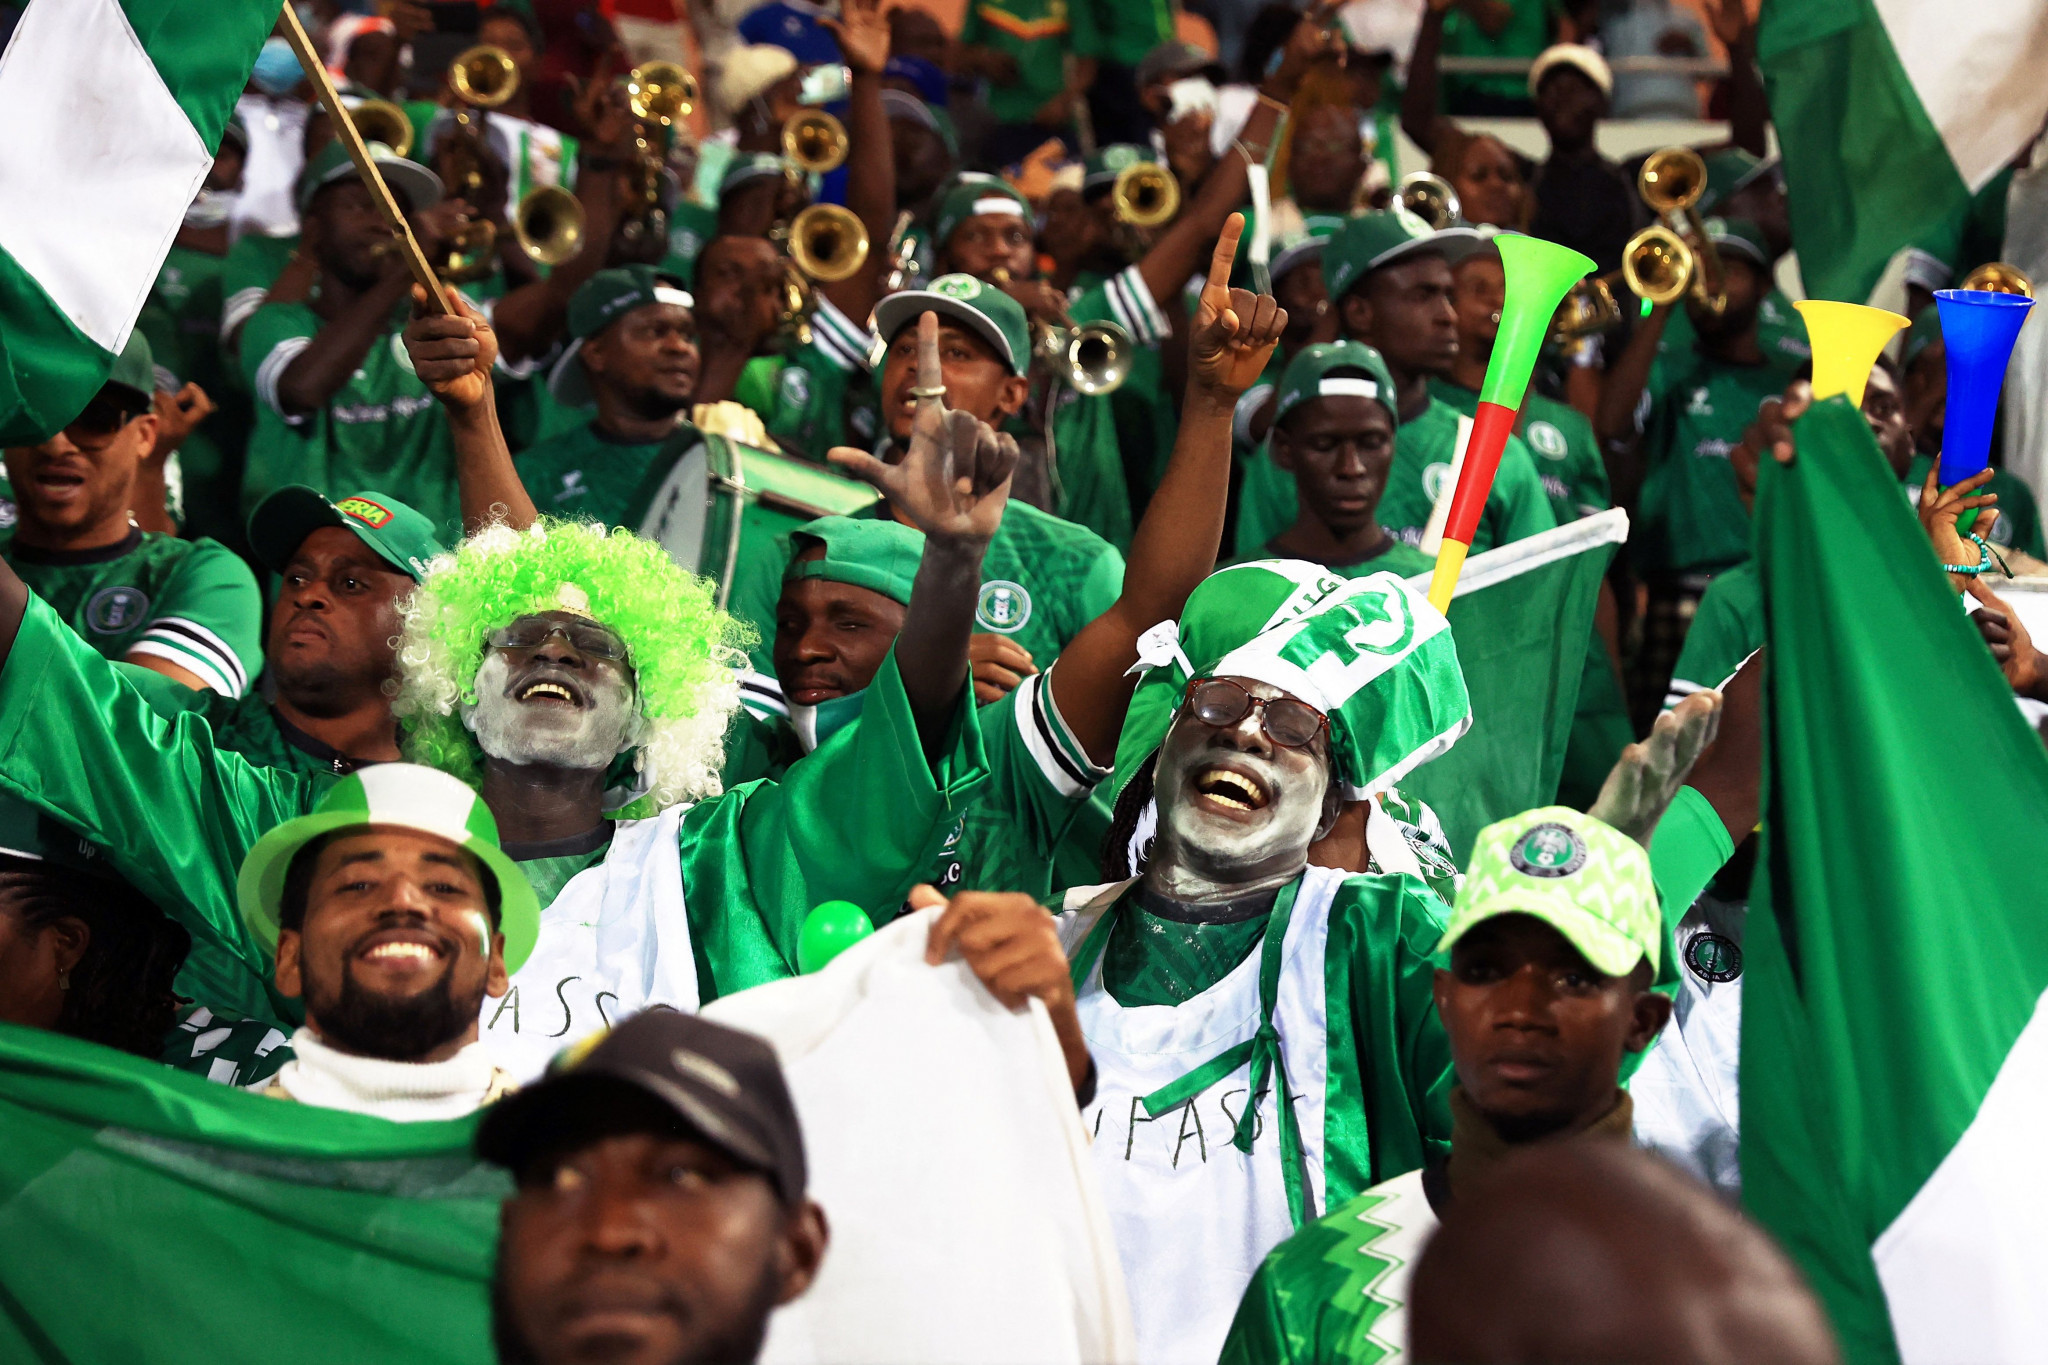 Nigeria's men's football team have been knocked out of Paris 2024 contention ©Getty Images